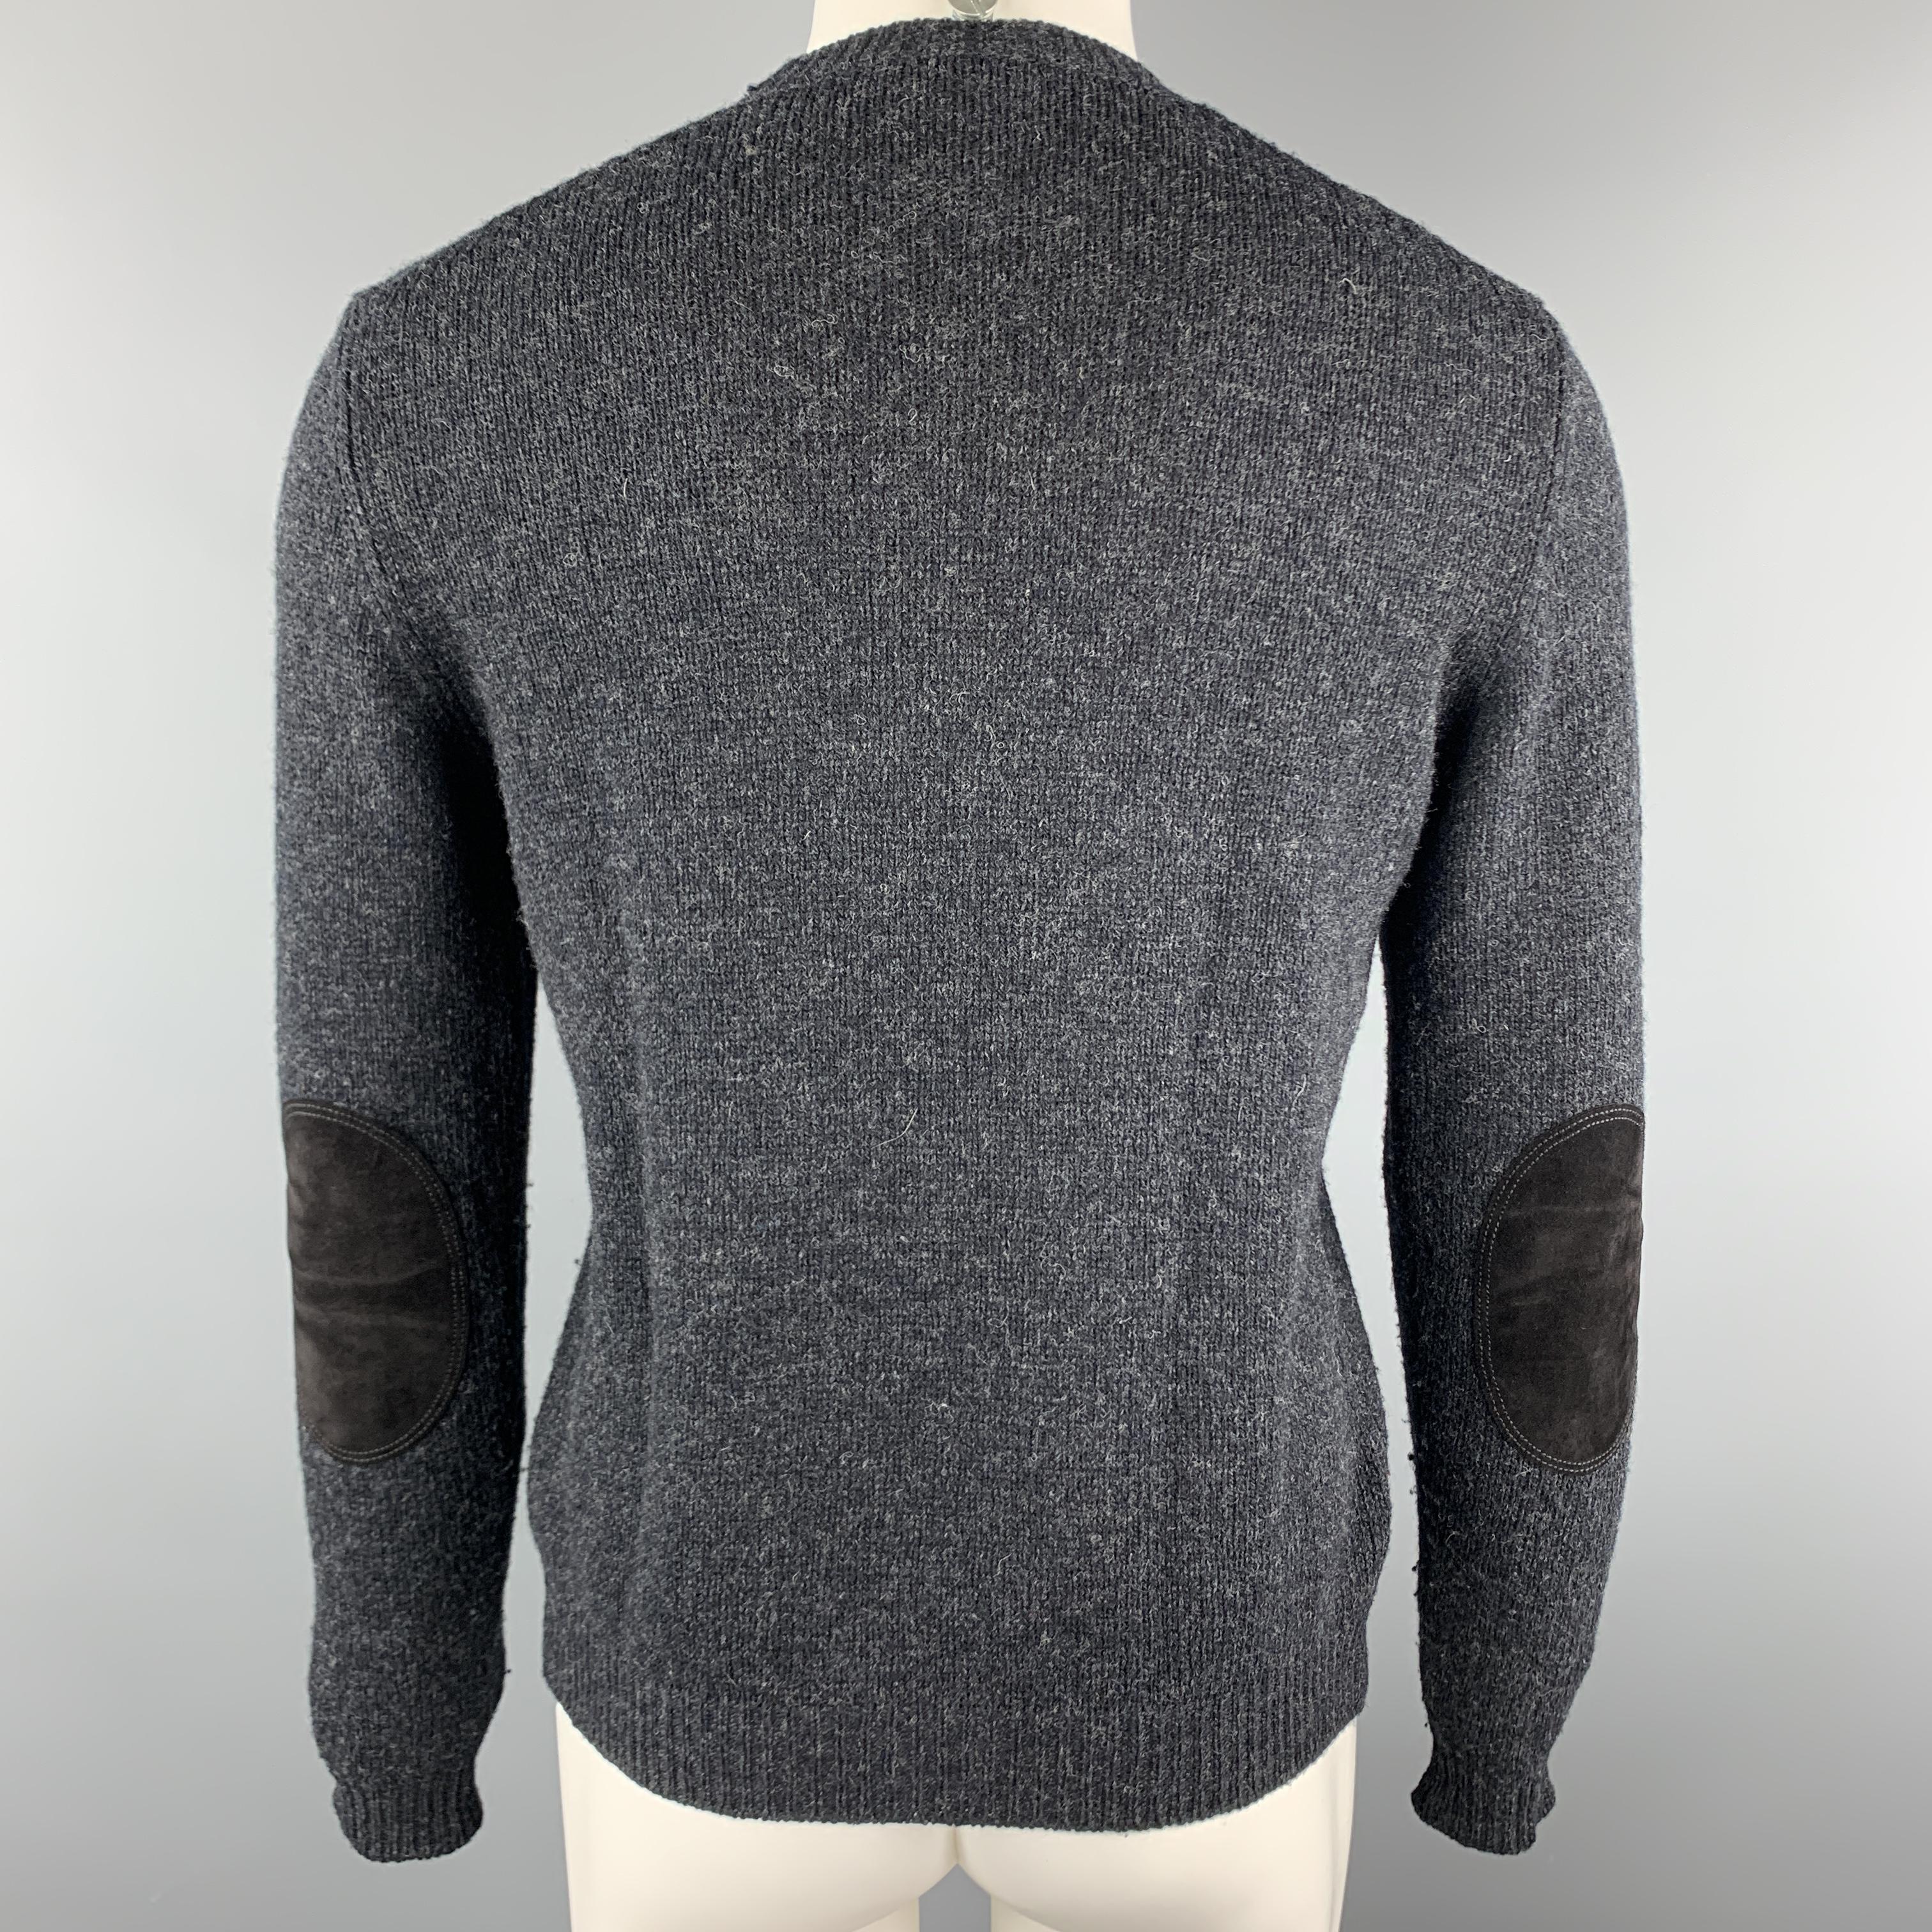 Black PRADA Size S Charcoal Wool Blend Crew-Neck Elbow Patches Pullover Sweater